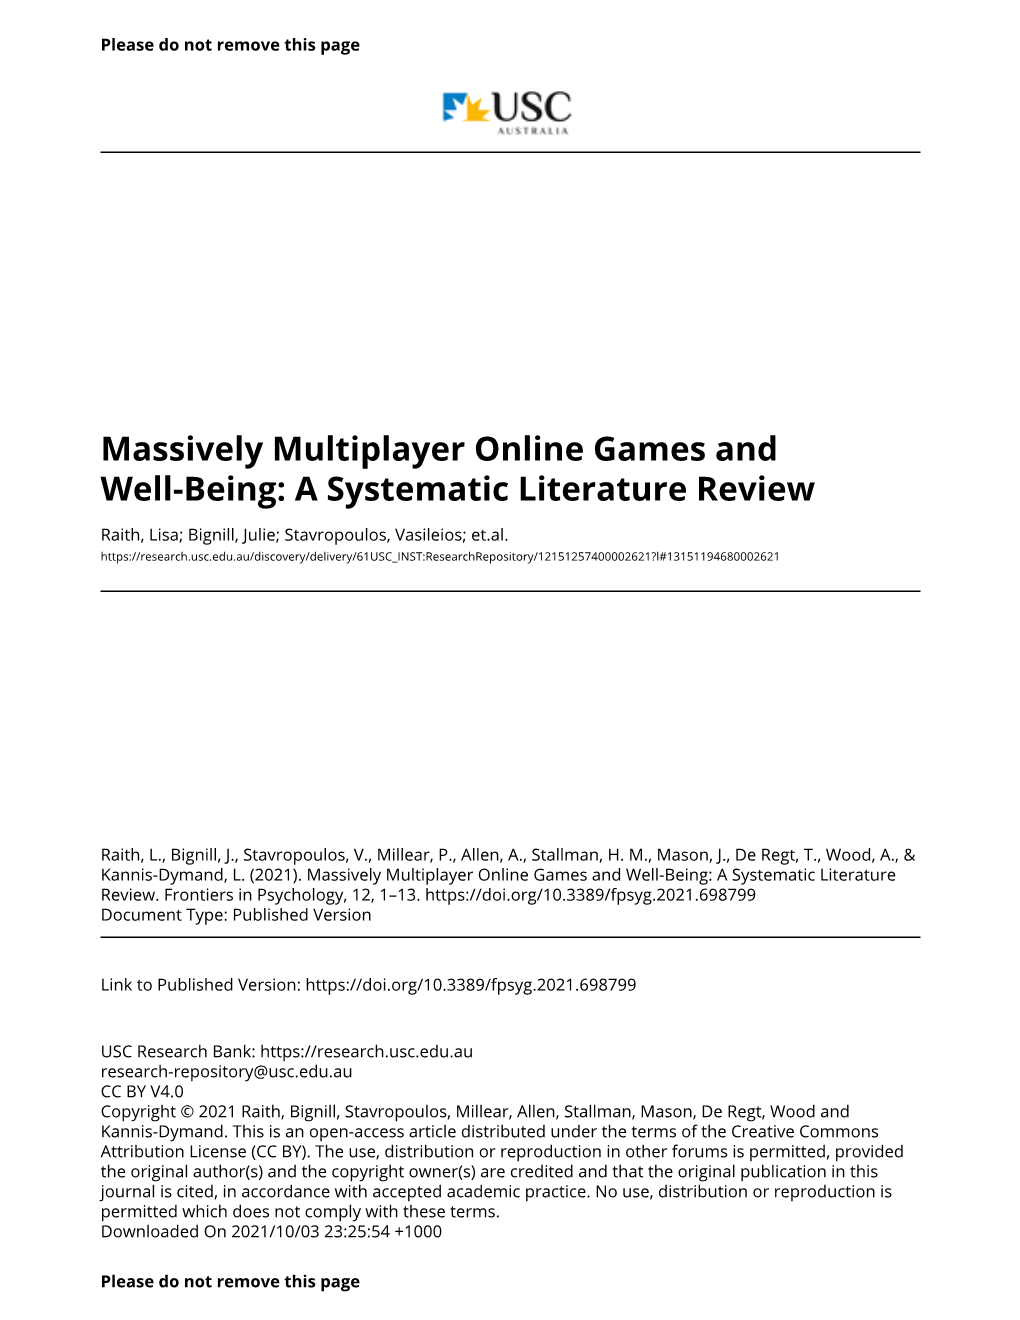 Massively Multiplayer Online Games and Well-Being: a Systematic Literature Review